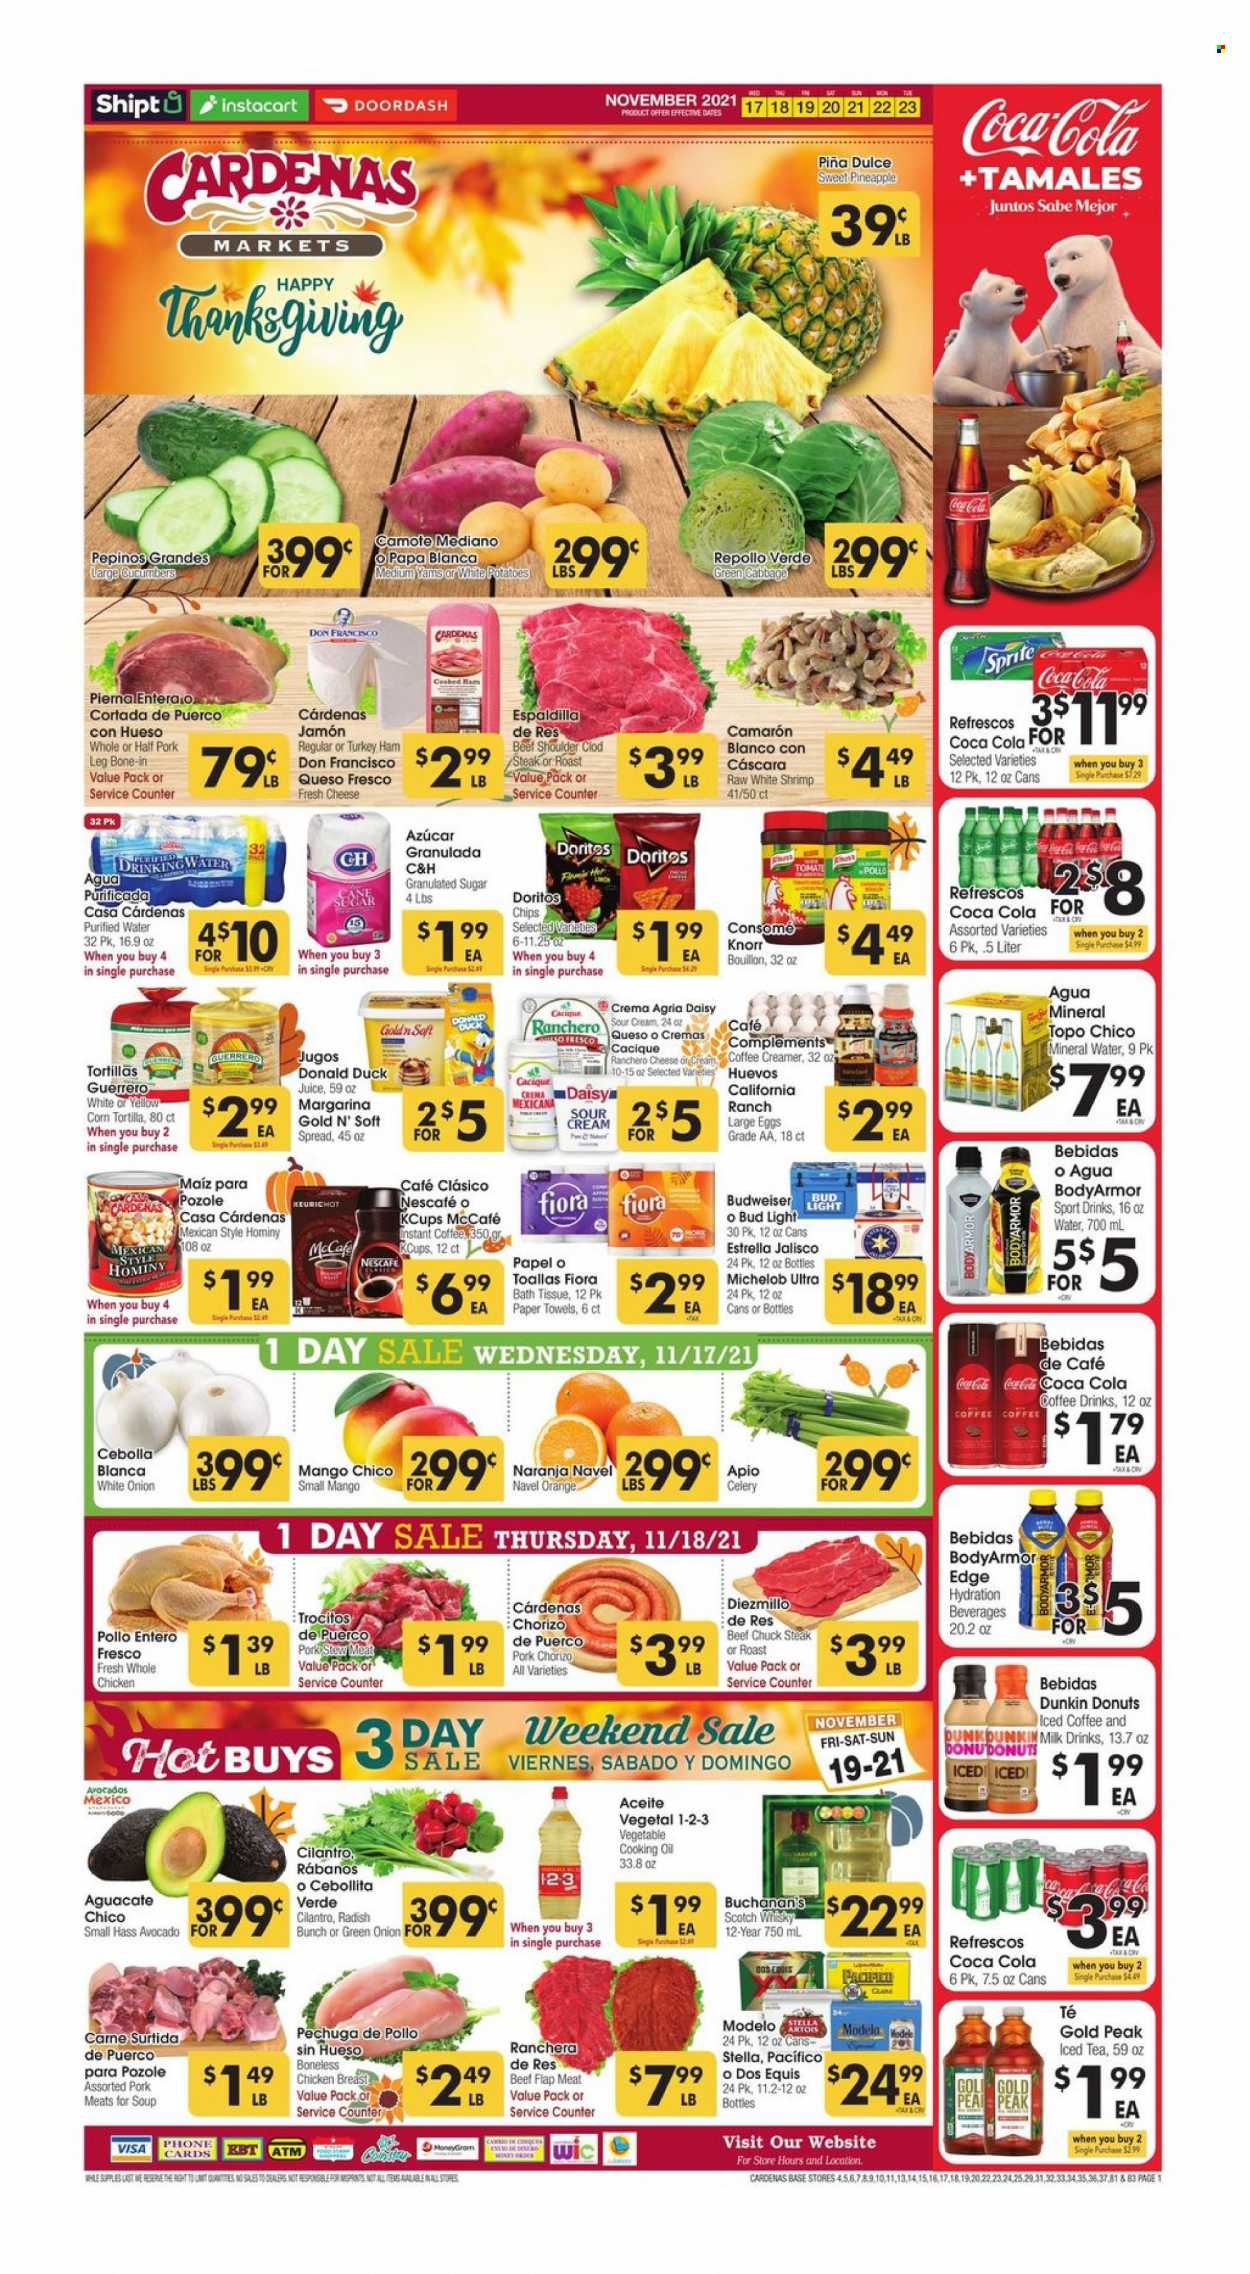 thumbnail - Cardenas Flyer - 11/17/2021 - 11/23/2021 - Sales products - stew meat, tortillas, donut, cabbage, celery, cucumber, radishes, potatoes, green onion, sleeved celery, avocado, mango, pineapple, oranges, shrimps, soup, Knorr, cooked ham, ham, chorizo, queso fresco, milk, large eggs, sour cream, creamer, Doritos, chips, bouillon, granulated sugar, sugar, cilantro, oil, Coca-Cola, juice, ice tea, mineral water, purified water, iced coffee, Nescafé, L'Or, McCafe, scotch whisky, whisky, beer, Bud Light, Modelo, whole chicken, chicken breasts, beef meat, steak, chuck steak, pork meat, pork leg, bath tissue, kitchen towels, paper towels, Budweiser, Stella Artois, Dos Equis, Michelob, navel oranges. Page 1.